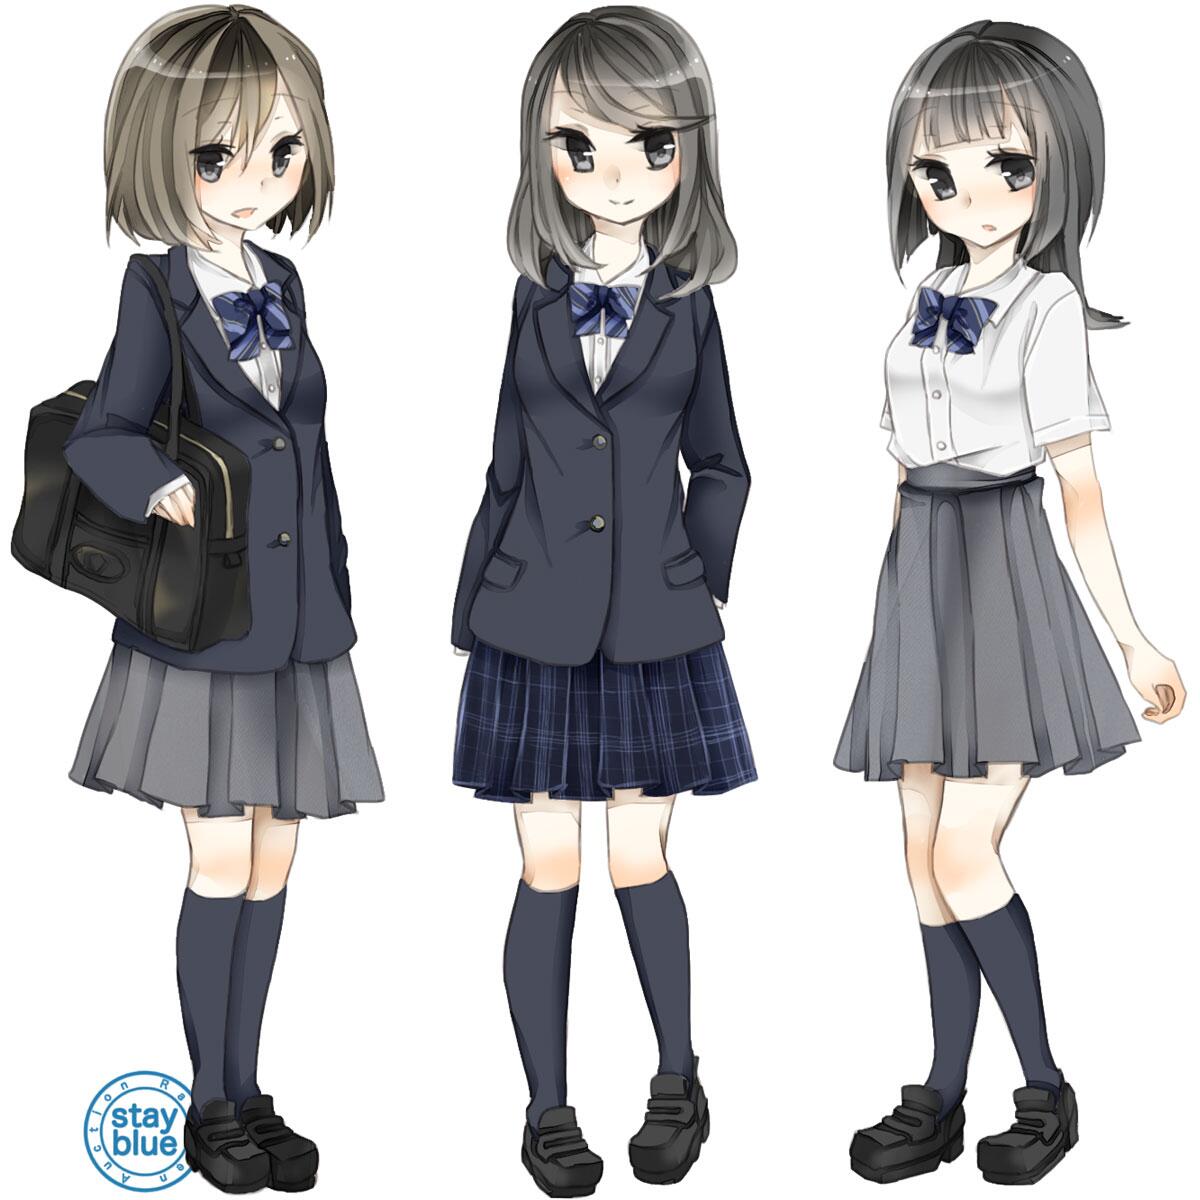 stayblue@学校制服図鑑 on Twitter: "不二女子高校の制服イラスト！ 千葉県市川市の学校です。シンプルなブレザースタイル